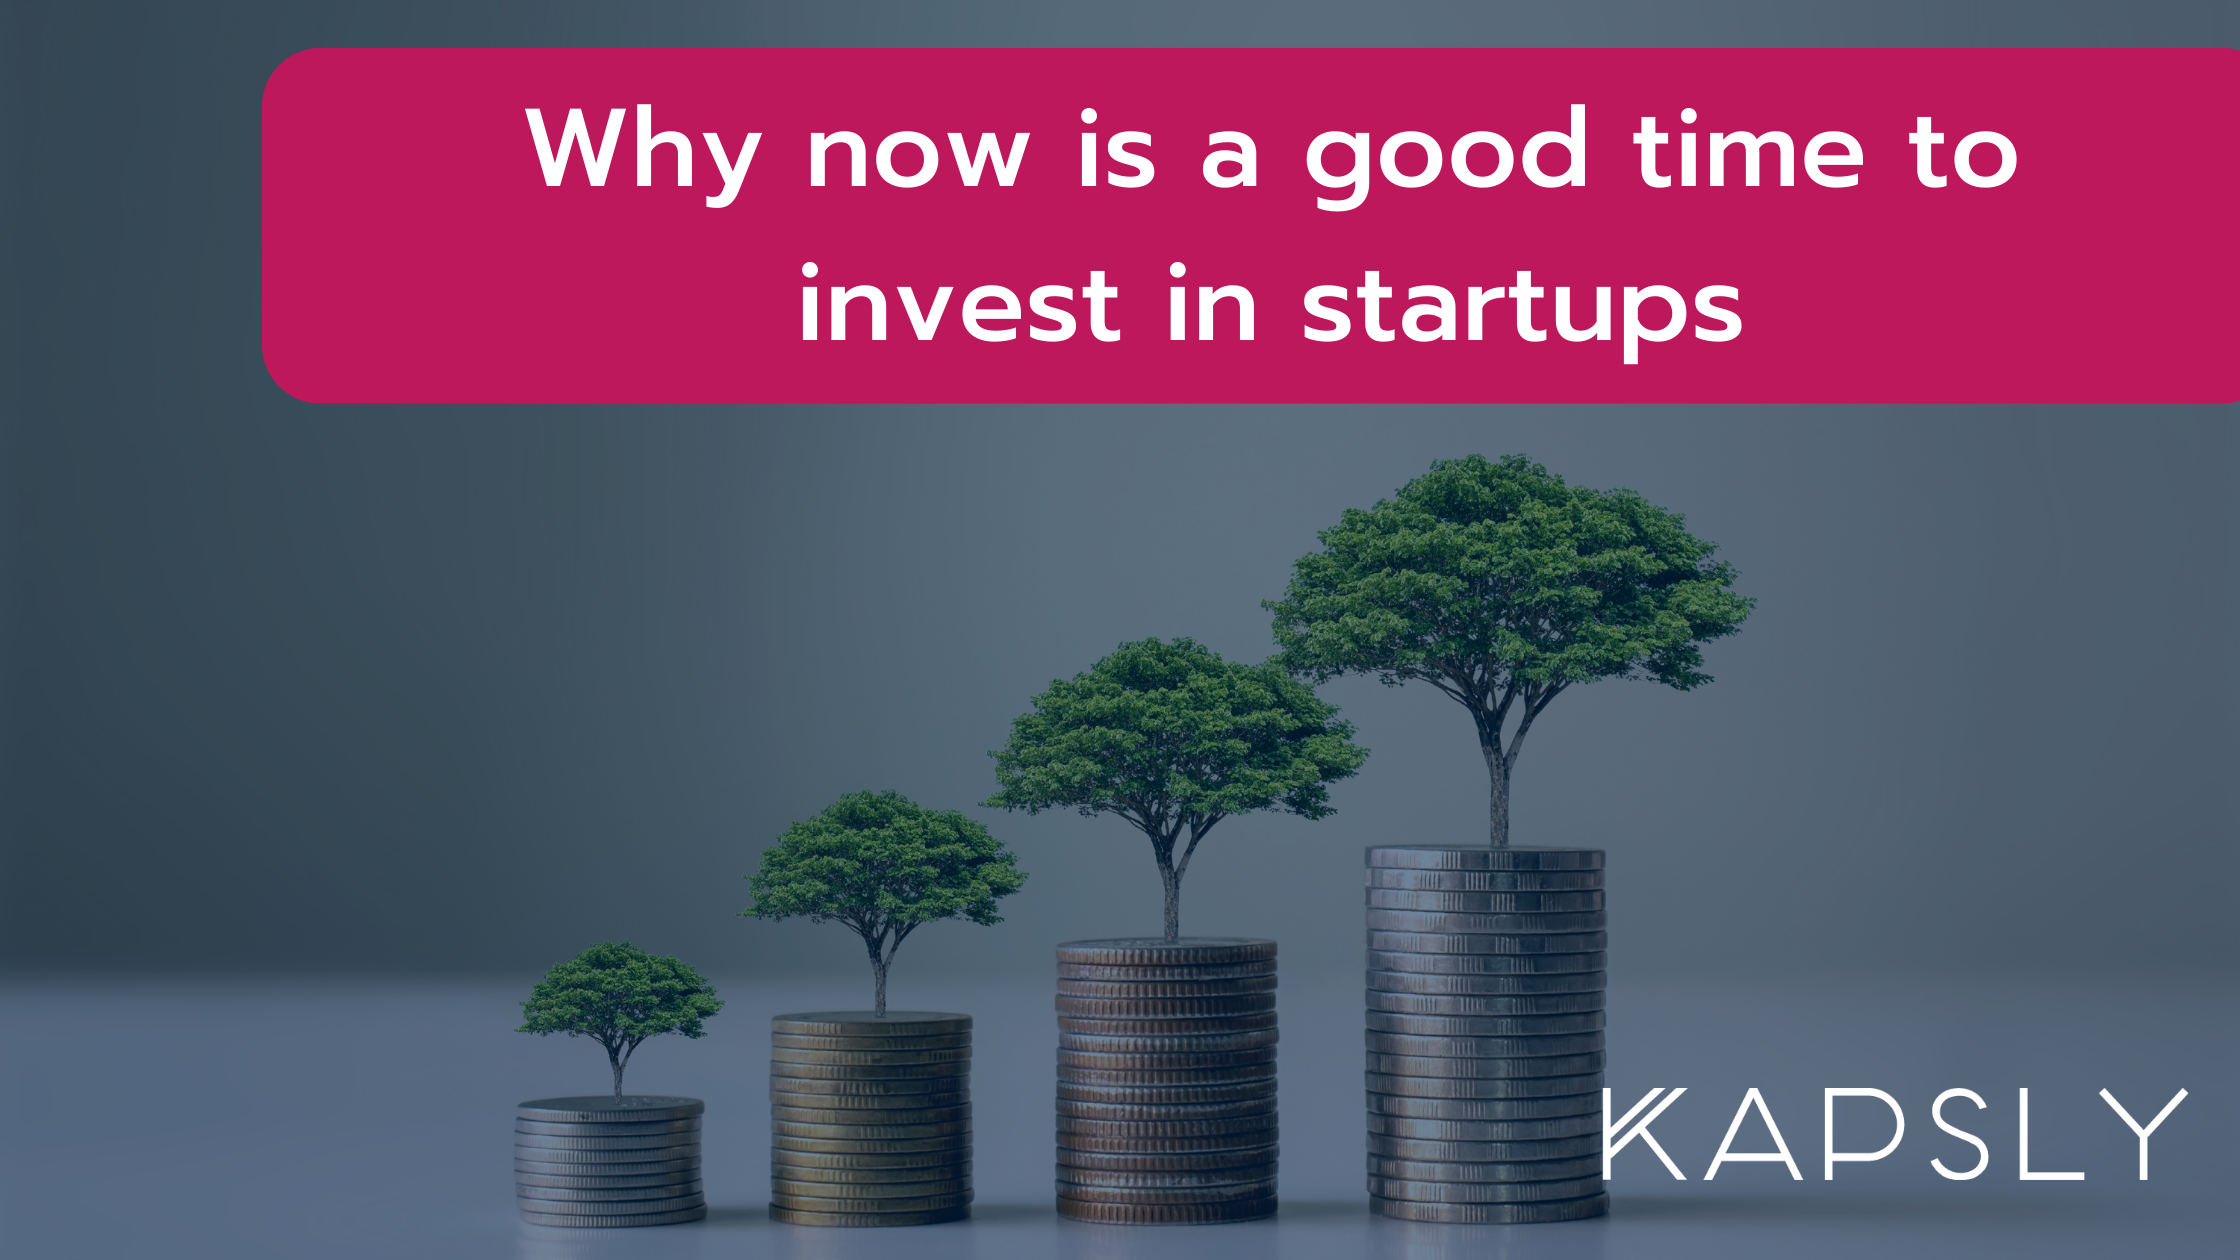 Now is a great time to invest in startups.